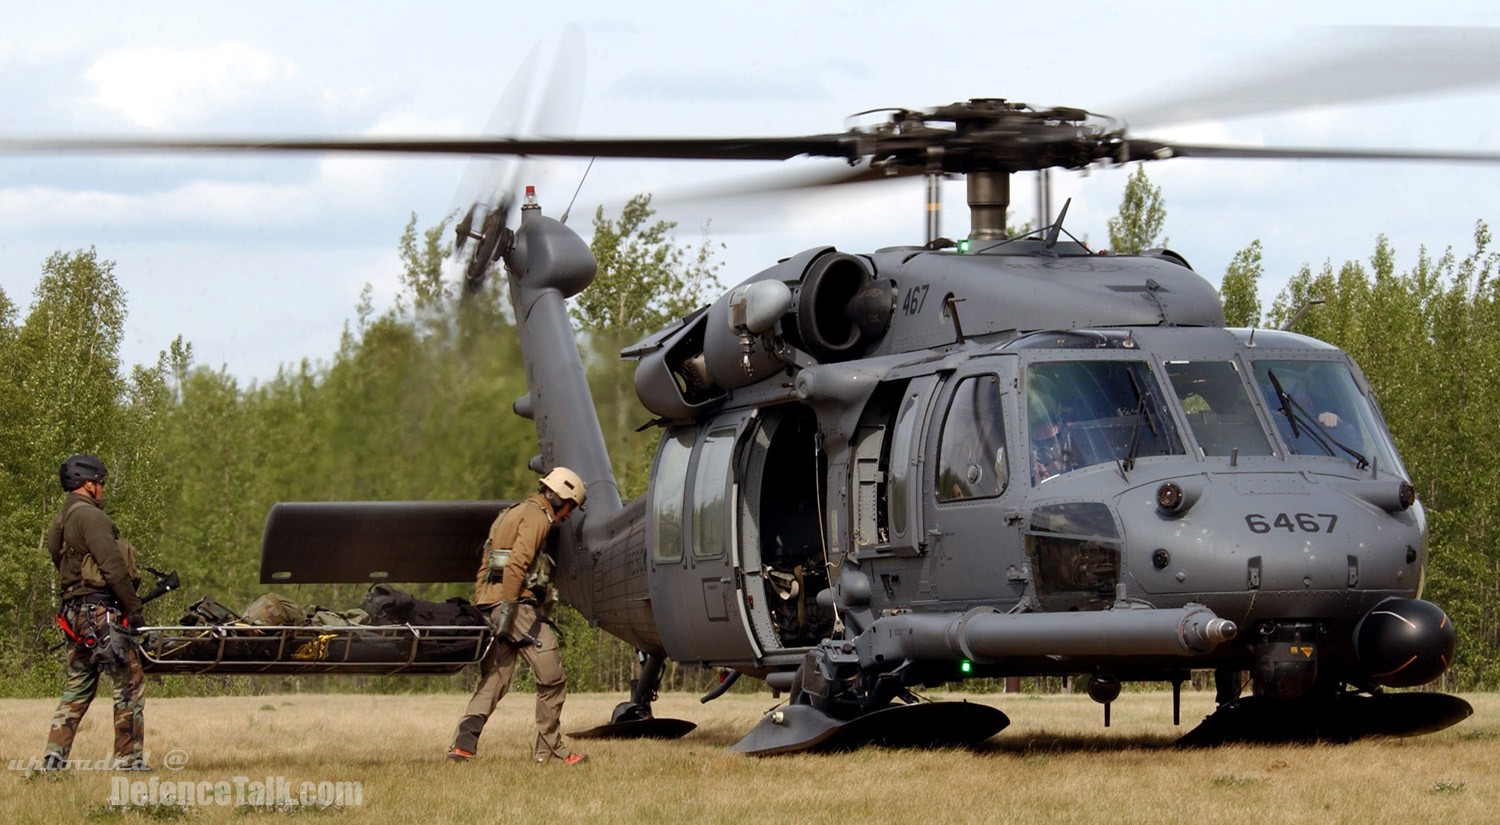 HH-60 Pave Hawk during a combat search and rescue mission for exercise Nort